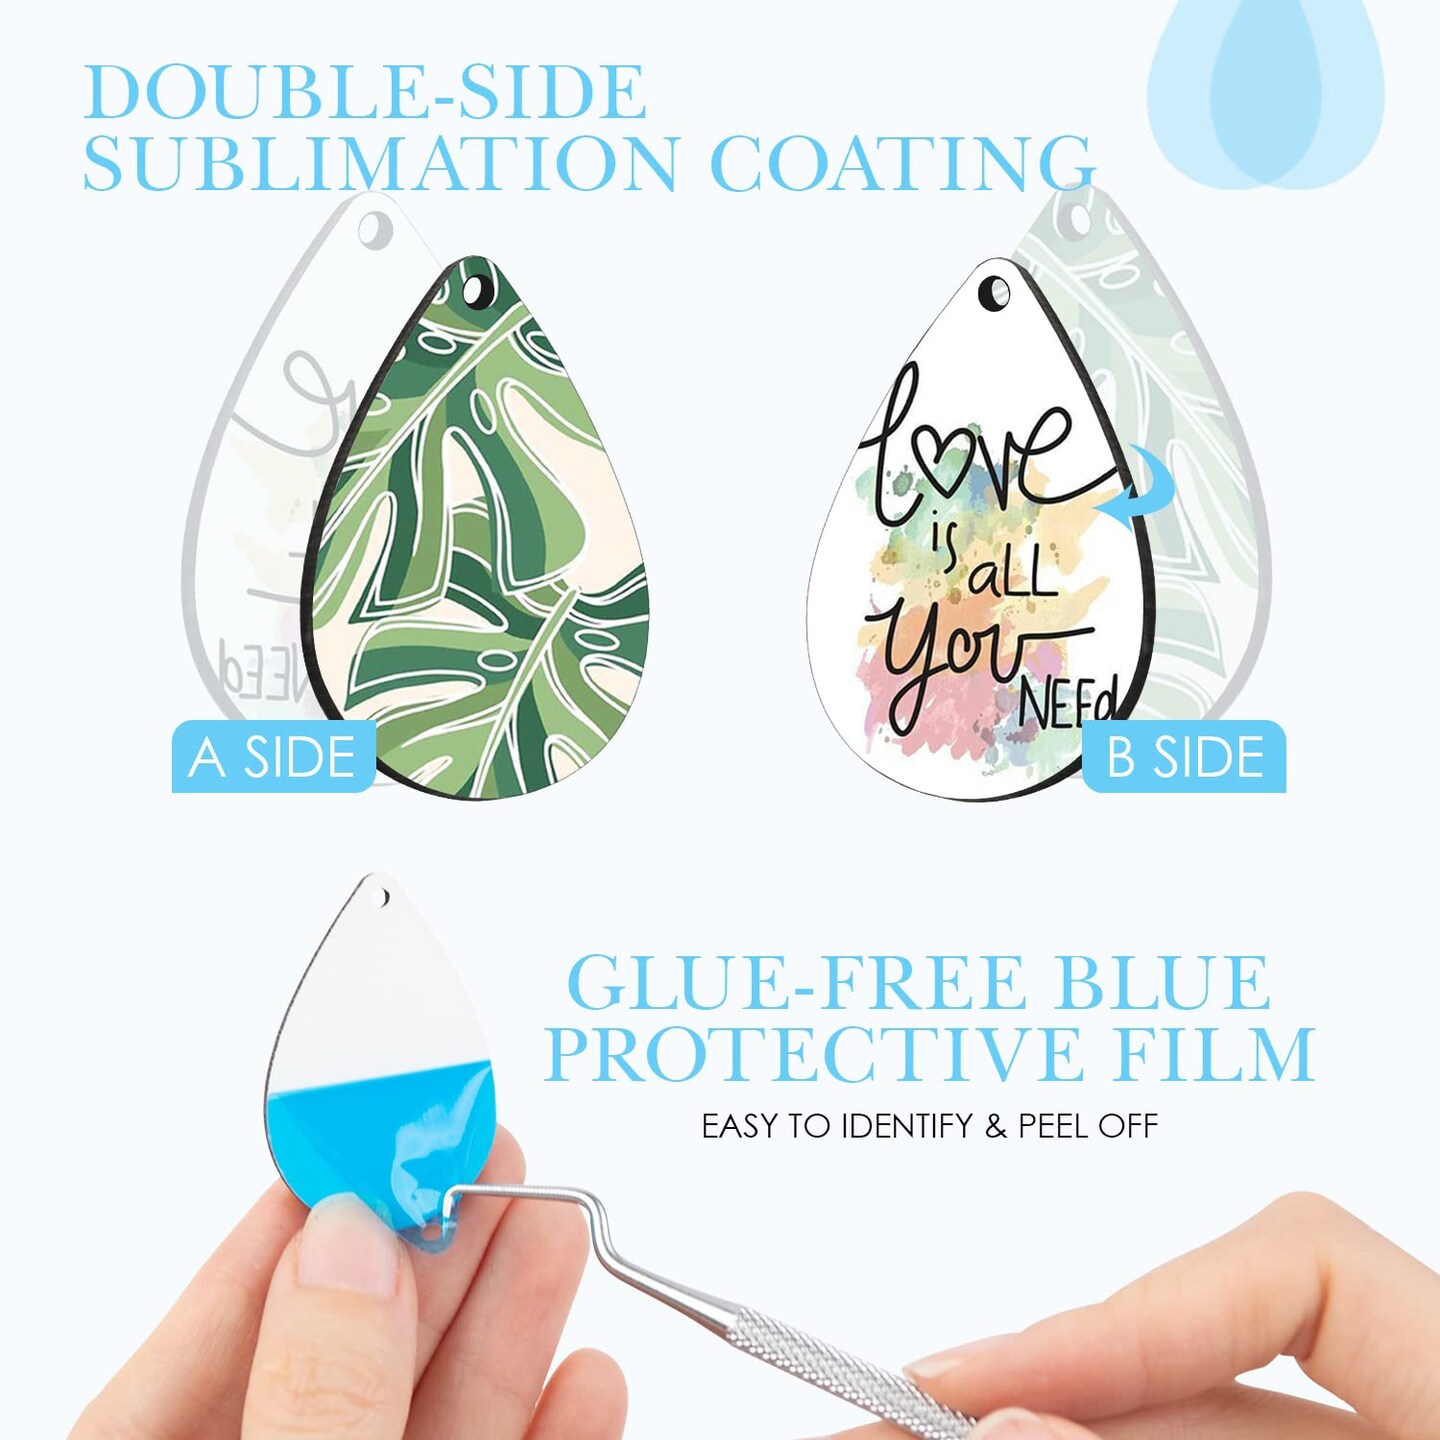 YGAOHF 1.8 Inch Large Sublimation Earring Blanks Bulk - Lightweight Wood  Earrings Blanks with Protective Film, Unfinished MDF Teardrop Earrings for